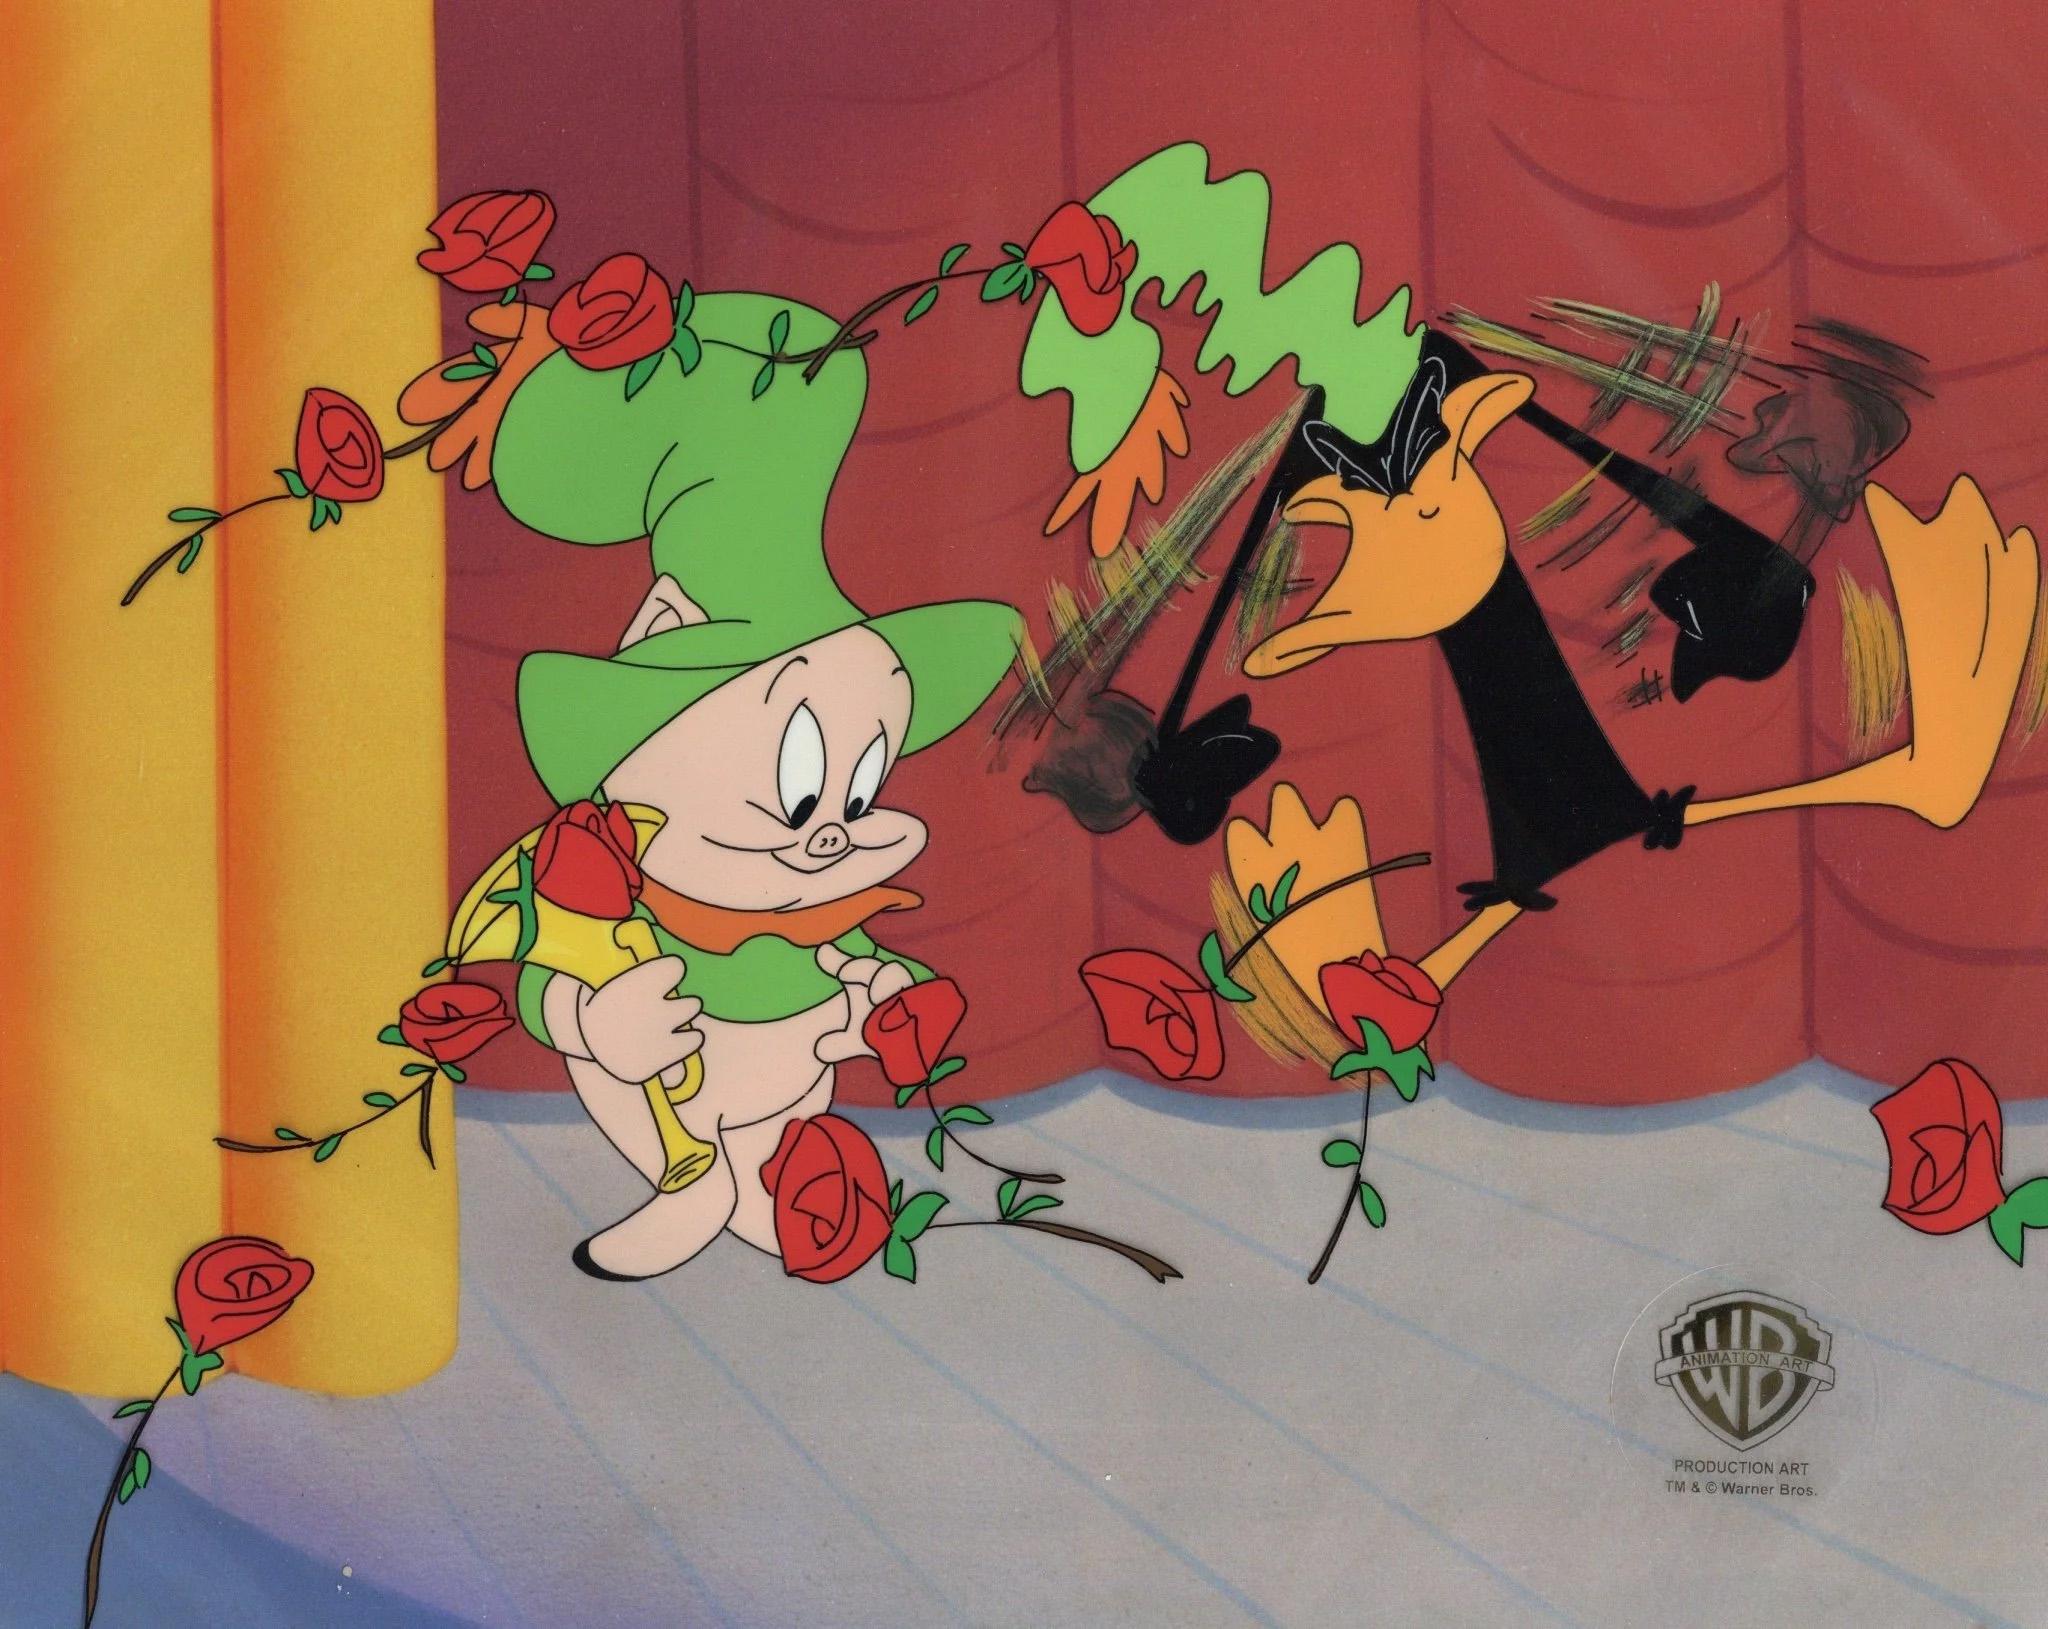 Looney Tunes Original Production Cel: Porky Pig and Daffy Duck - Art by Looney Tunes Studio Artists